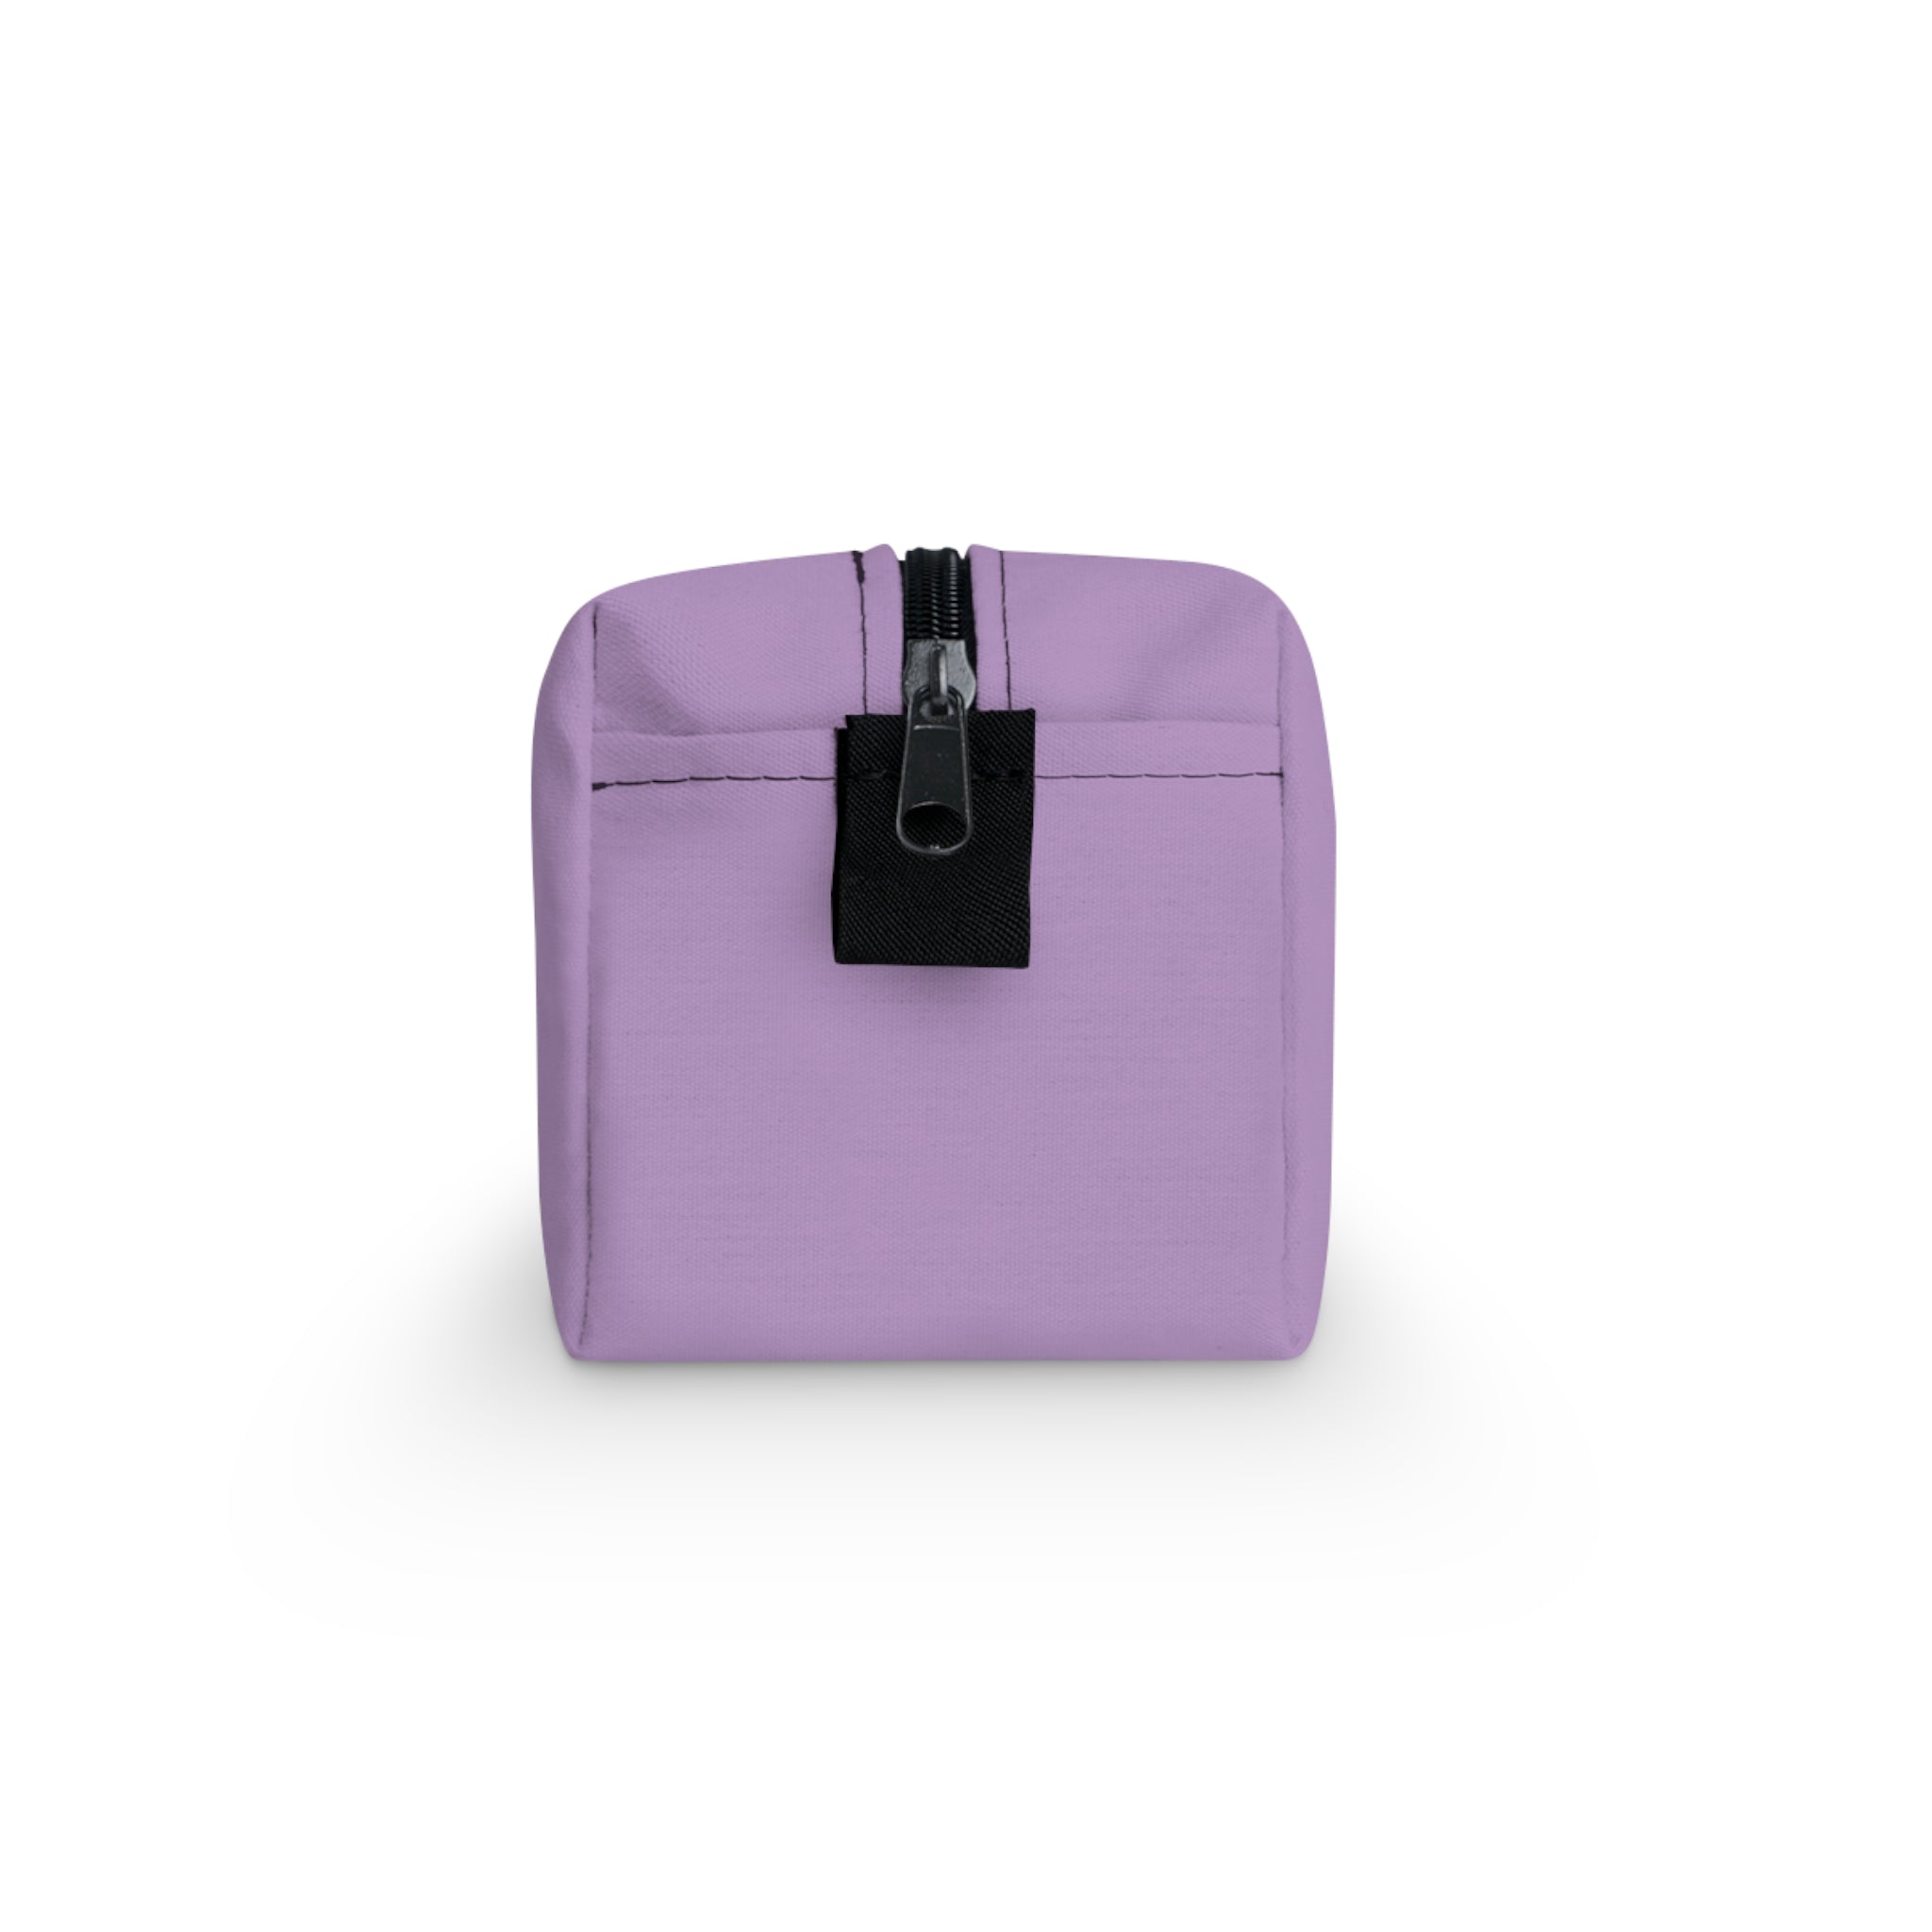 Travel Toiletry Pouch (Purple)